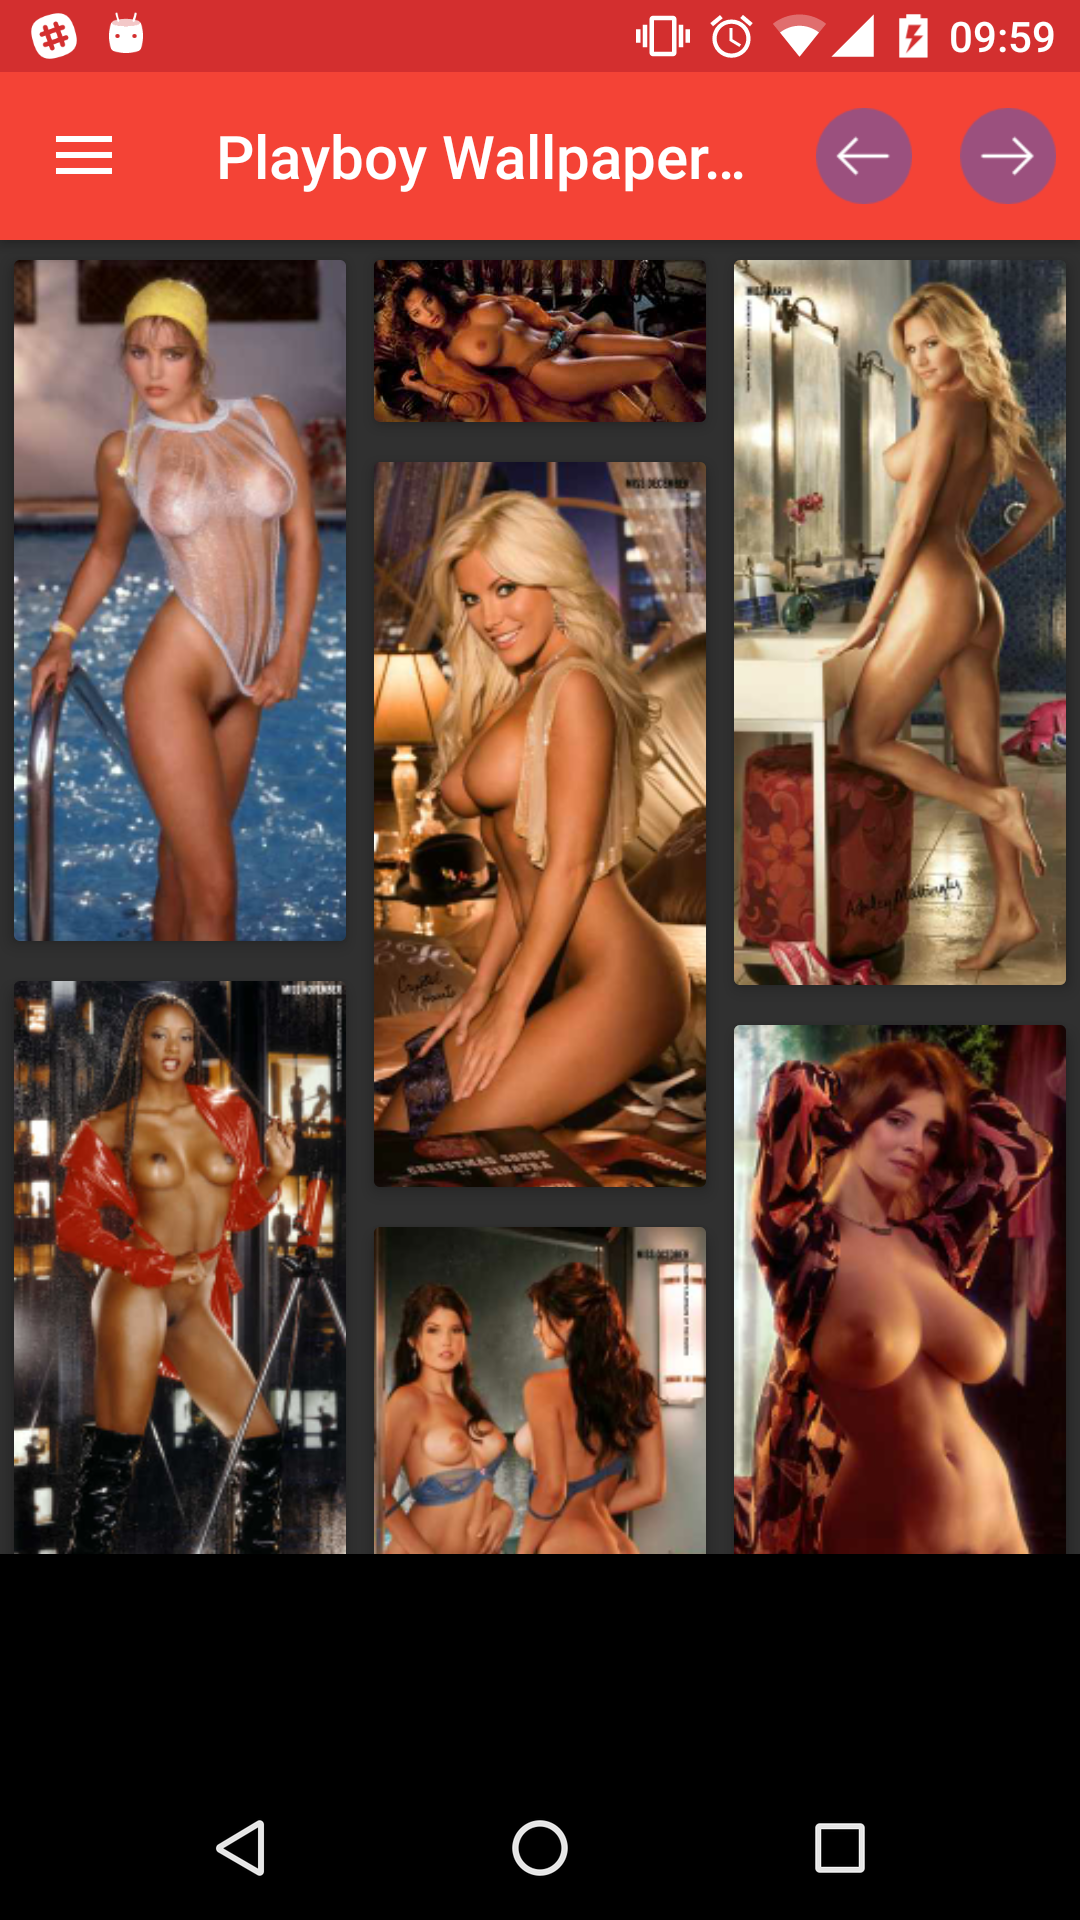 Playboy wallpapers personalization,images,photo,rated,panties,mod,wallpapers,hantai,hentai,apk,pictures,backgrounds,anime,puzzles,android,playboy,customization,centerfolds,photos,magazine,sexy,video,erotic,apps,pics,download